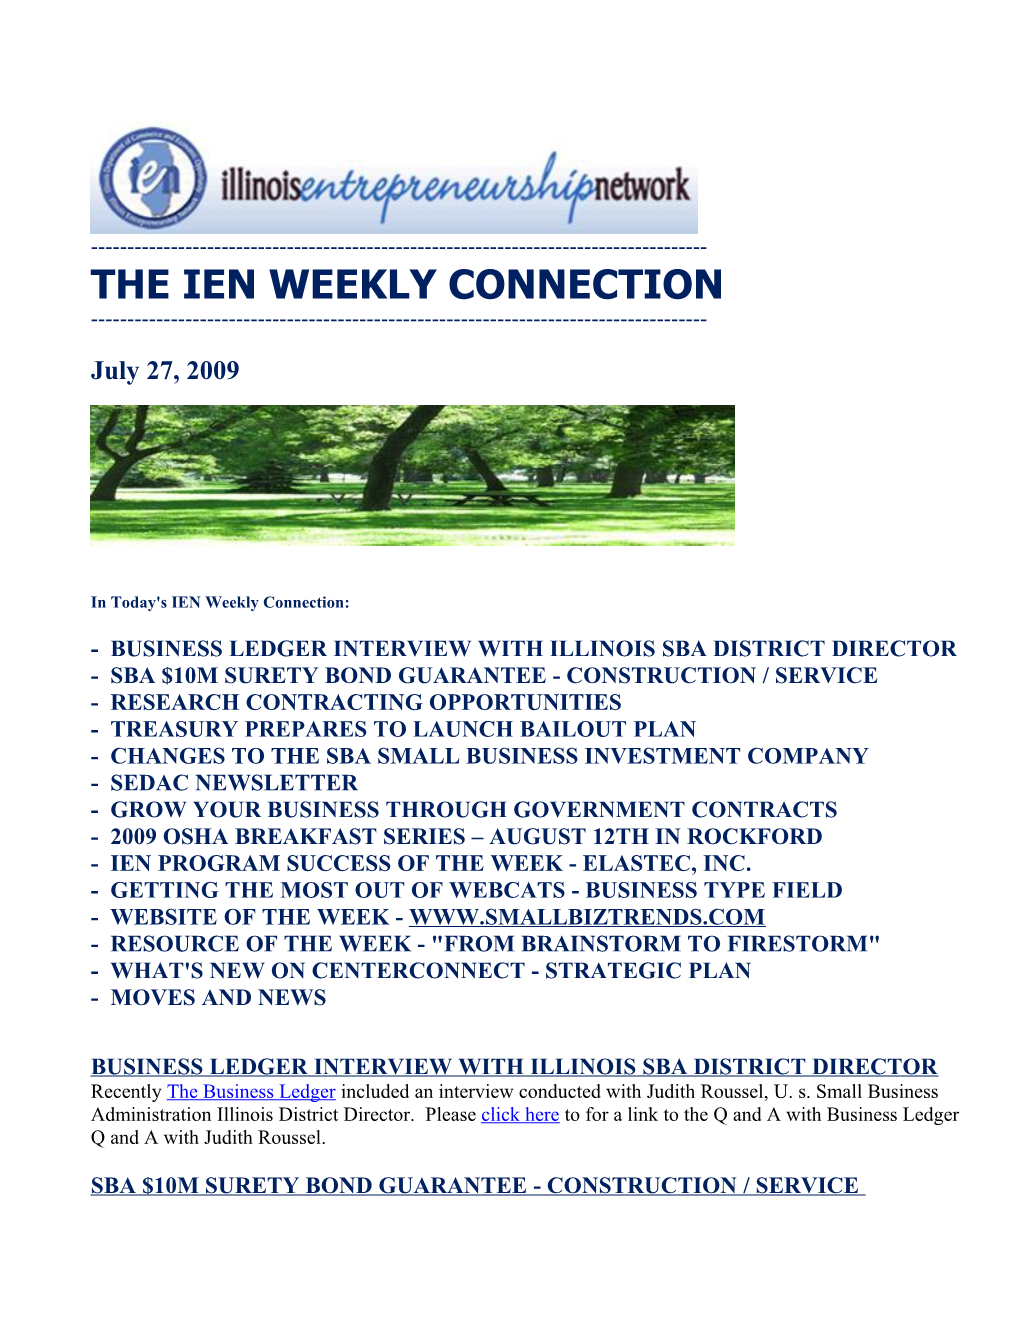 In Today'sien Weekly Connection s9